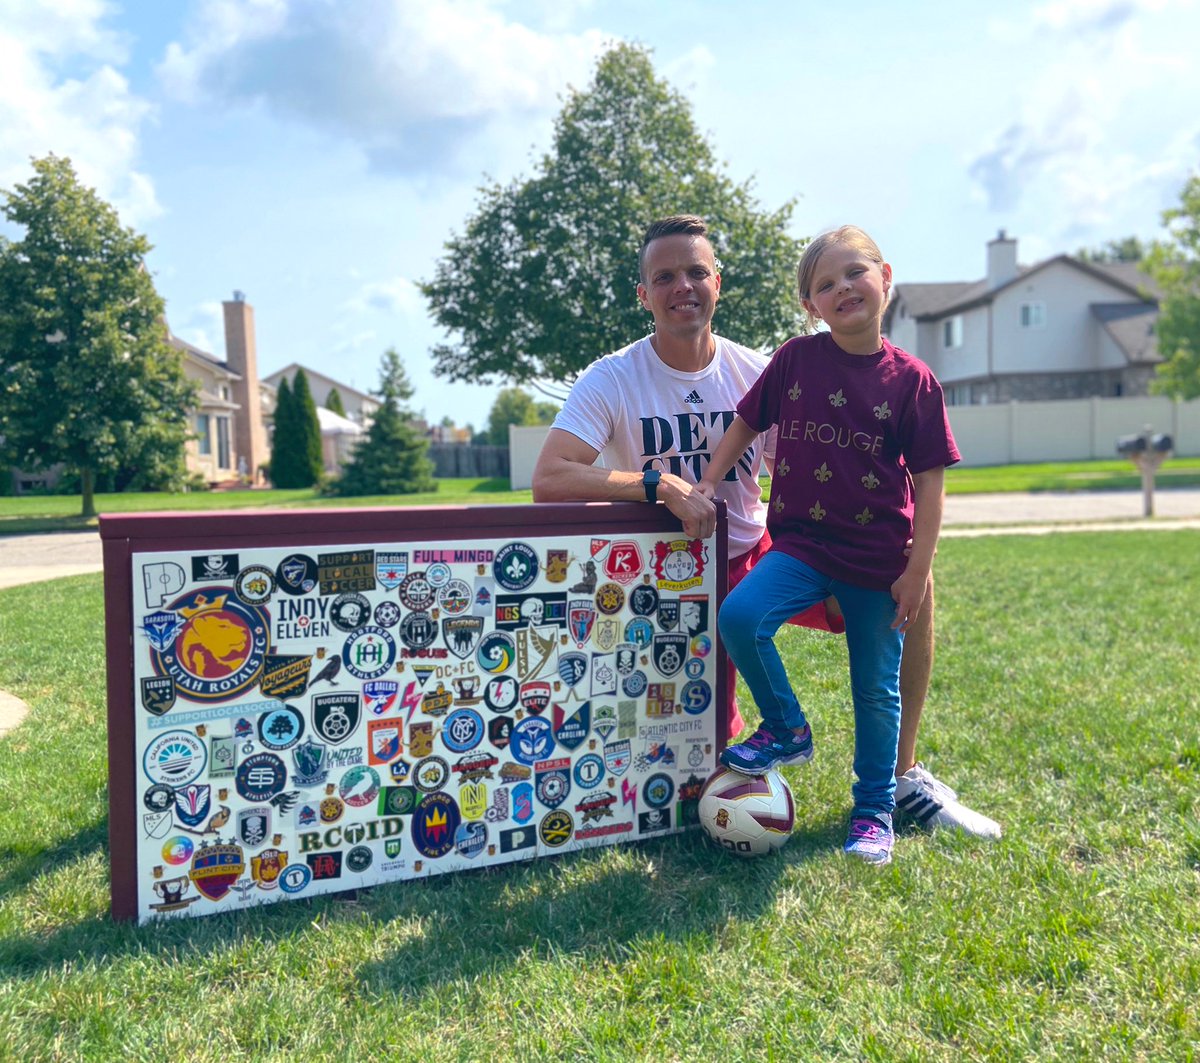 This weekend we put the finishing touches on our summer kick wall project! Since April, Grace has gotten replies to her letters from 52 clubs across the country! Thank you to everyone who supported us! Tags incoming...